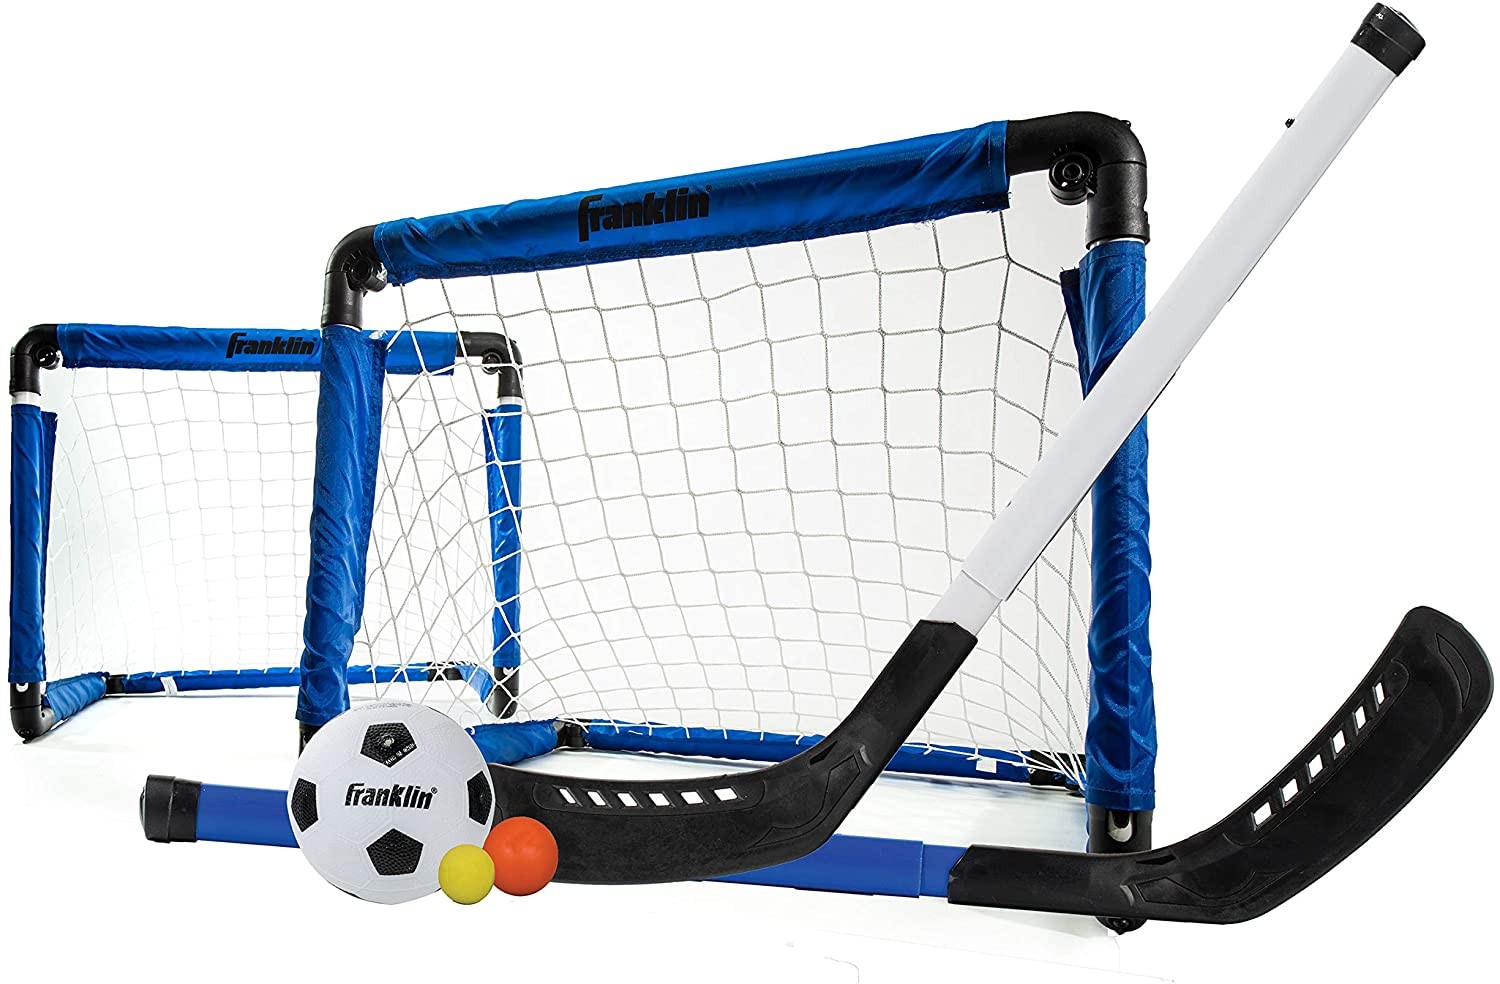 The 3-in-1 hockey and soccer kit for kids.